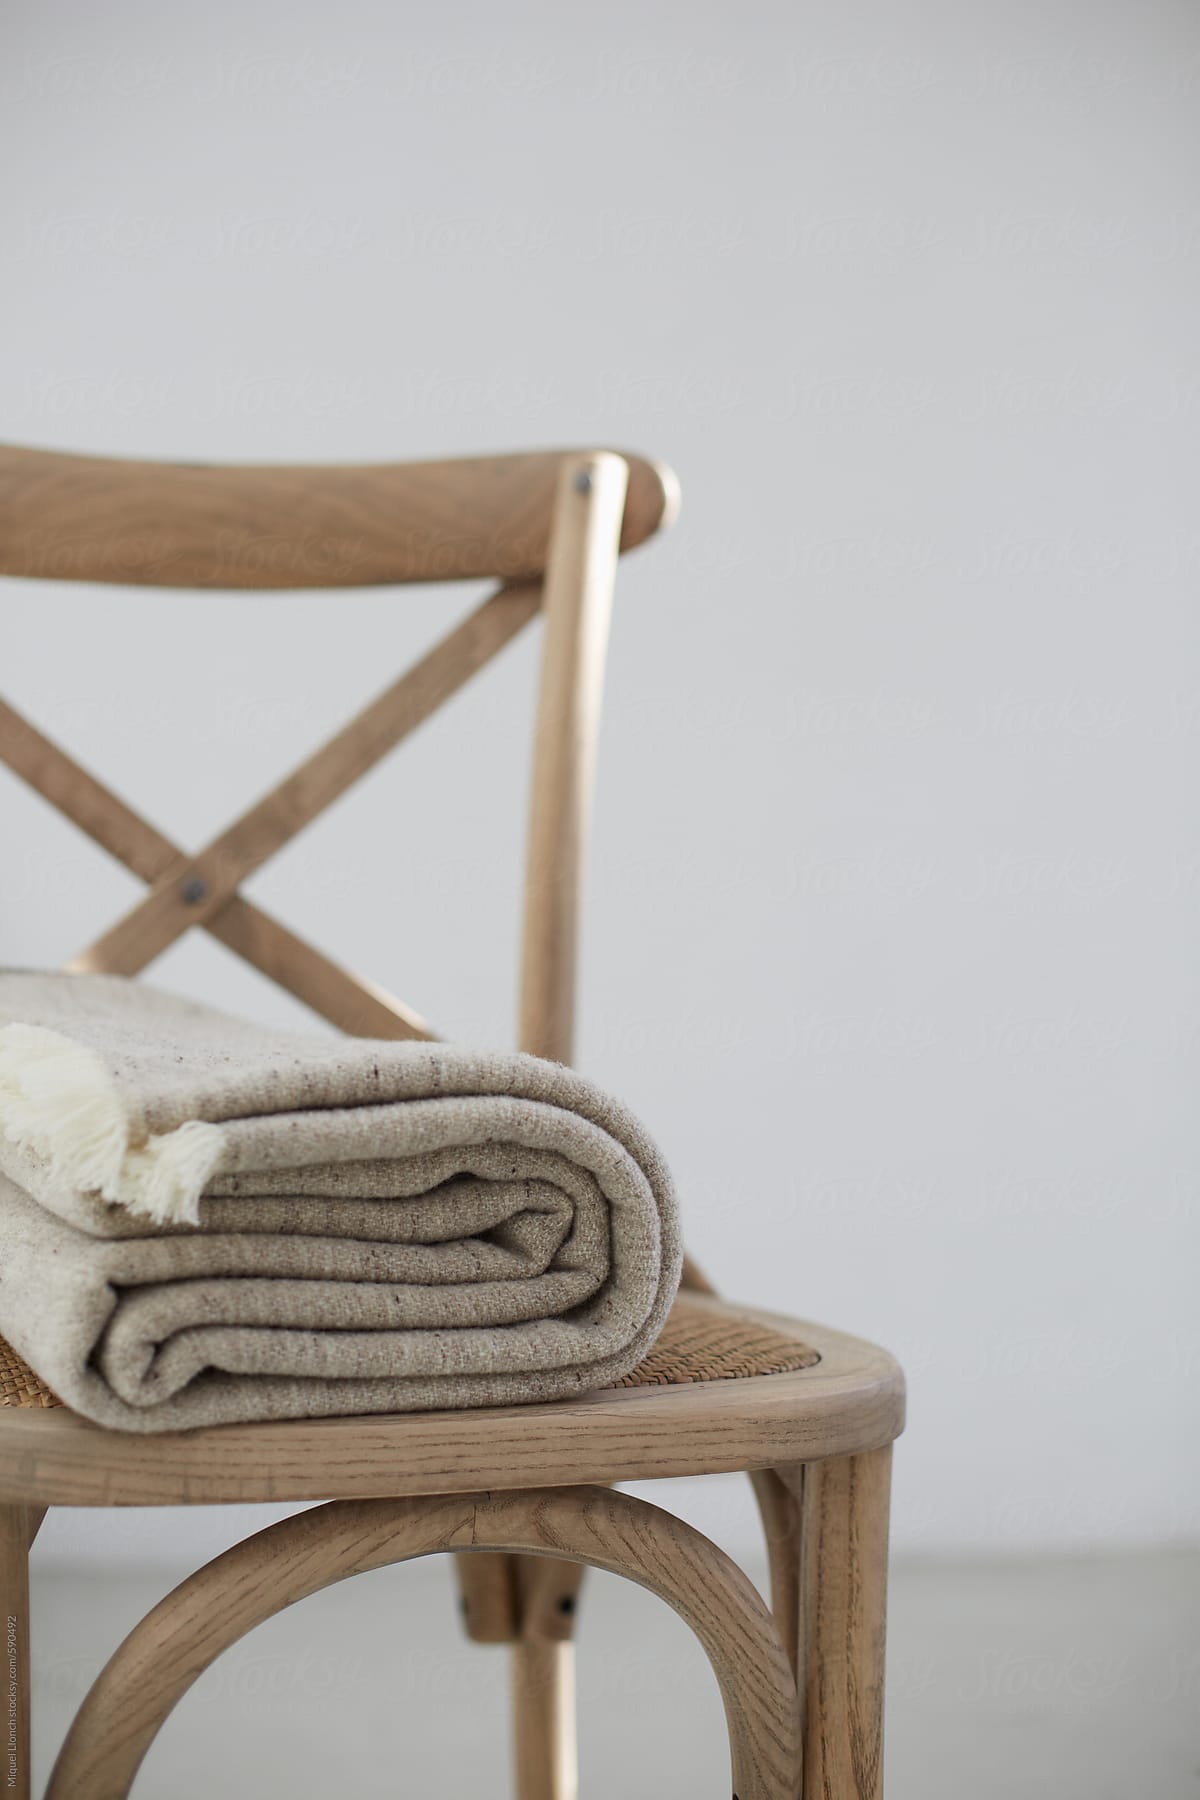 Chair and wool blanket with white background